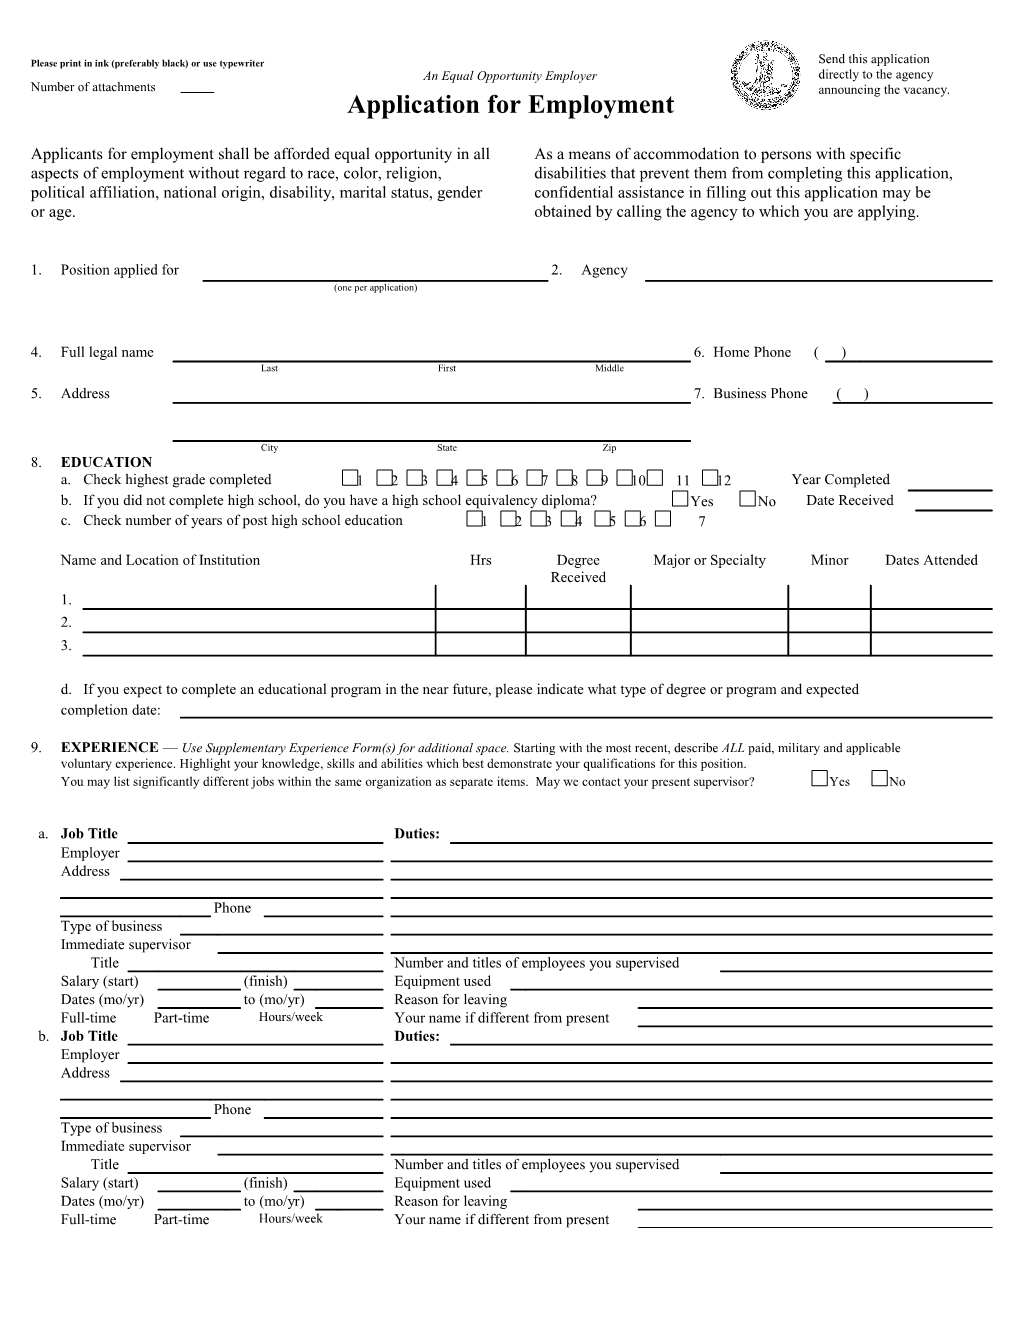 State Employment Application s1